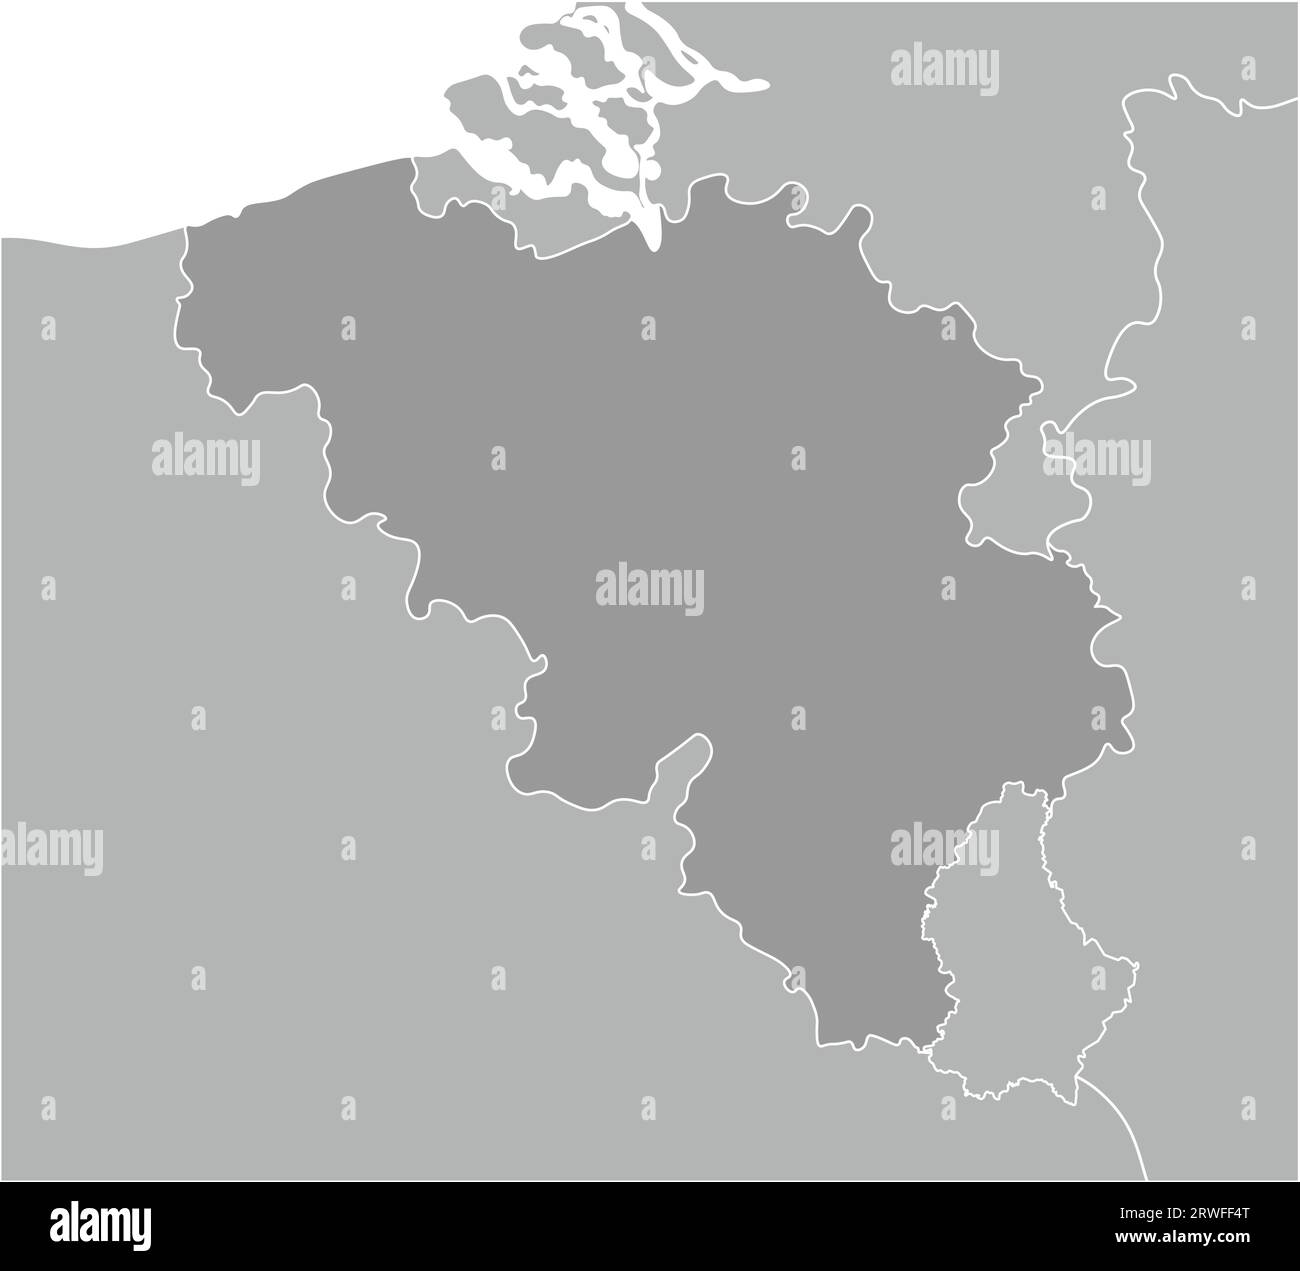 Vector modern illustration. Simplified geographical  grey map of Belgium and nearest countries (France, Germany, Luxembourg, Netherlands). White backg Stock Vector